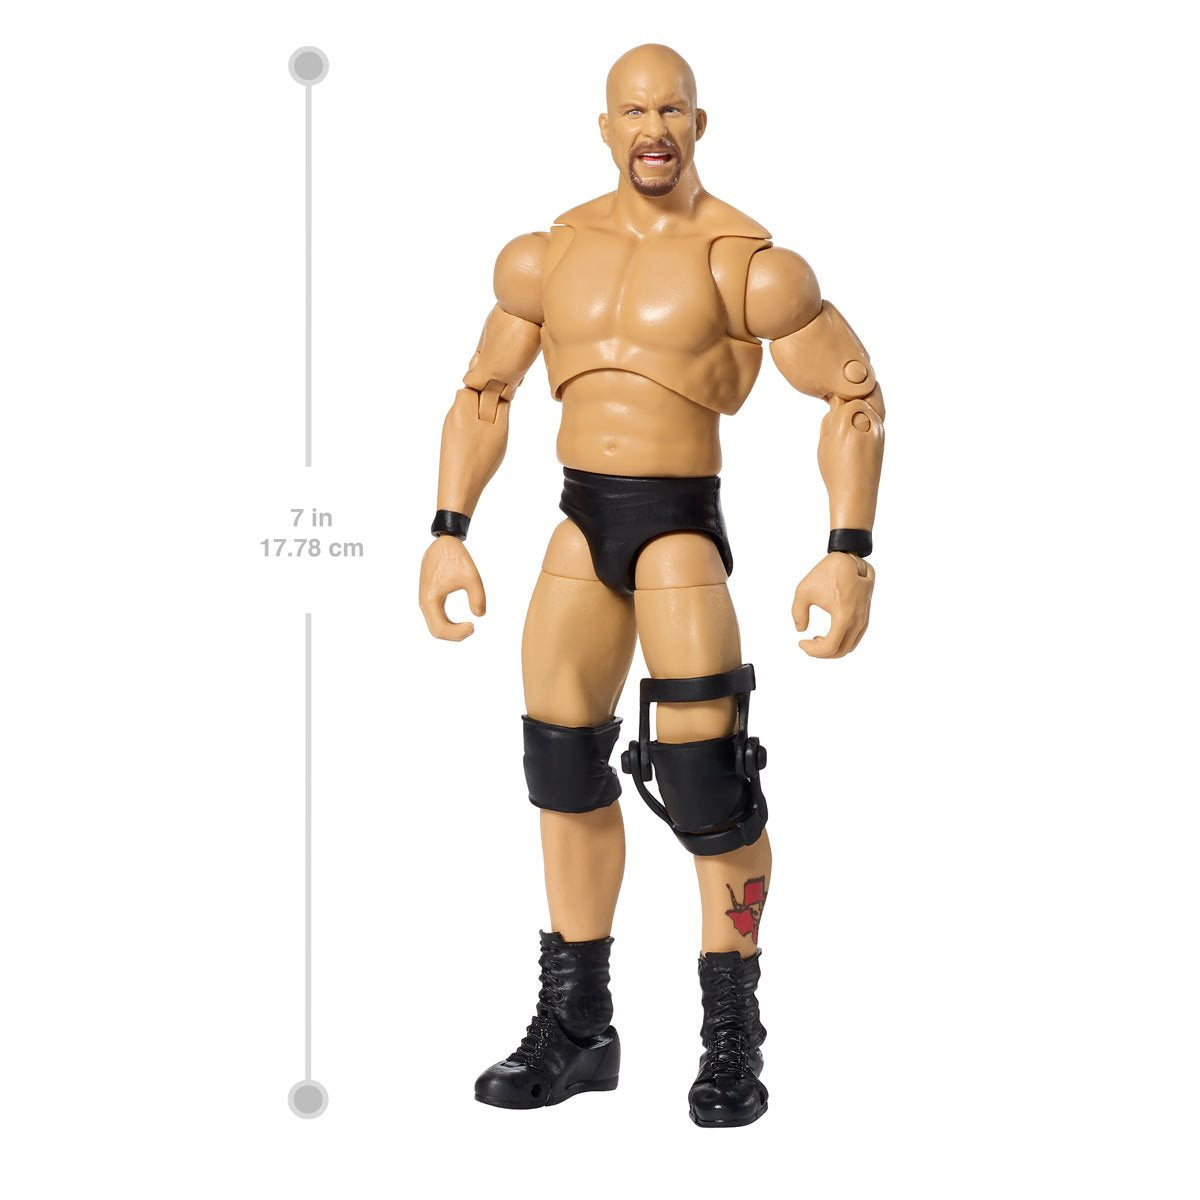 Stone Cold Steve Austin Action Figure showing how tall the figure is - Heretosereyou